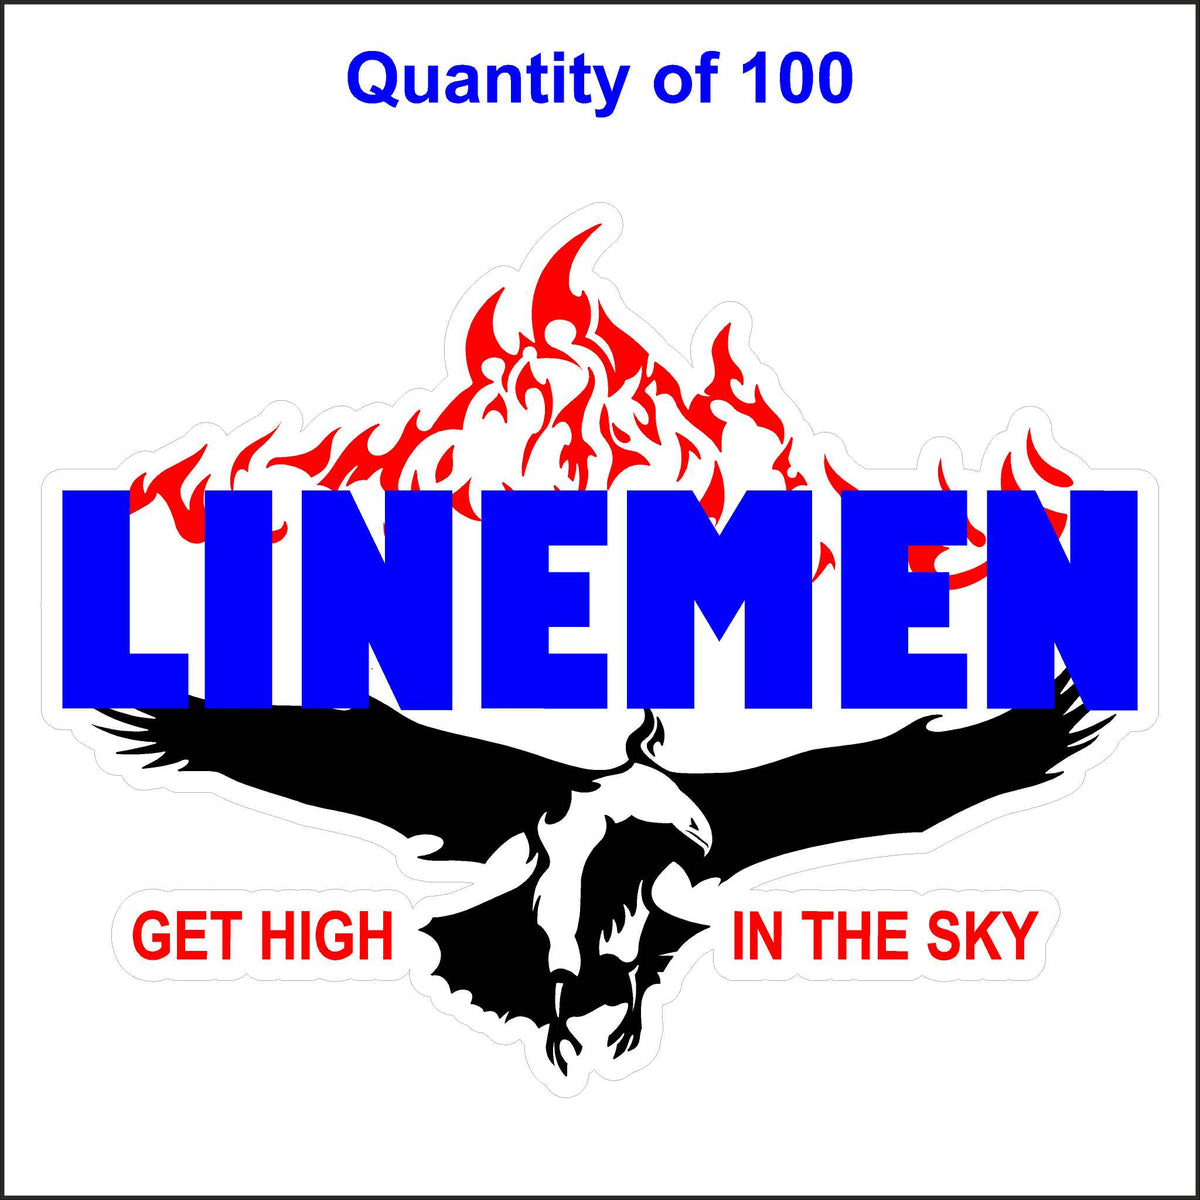 Linemen Get High in the Sky Sticker - Lineman Stickers. 100 Quantity.